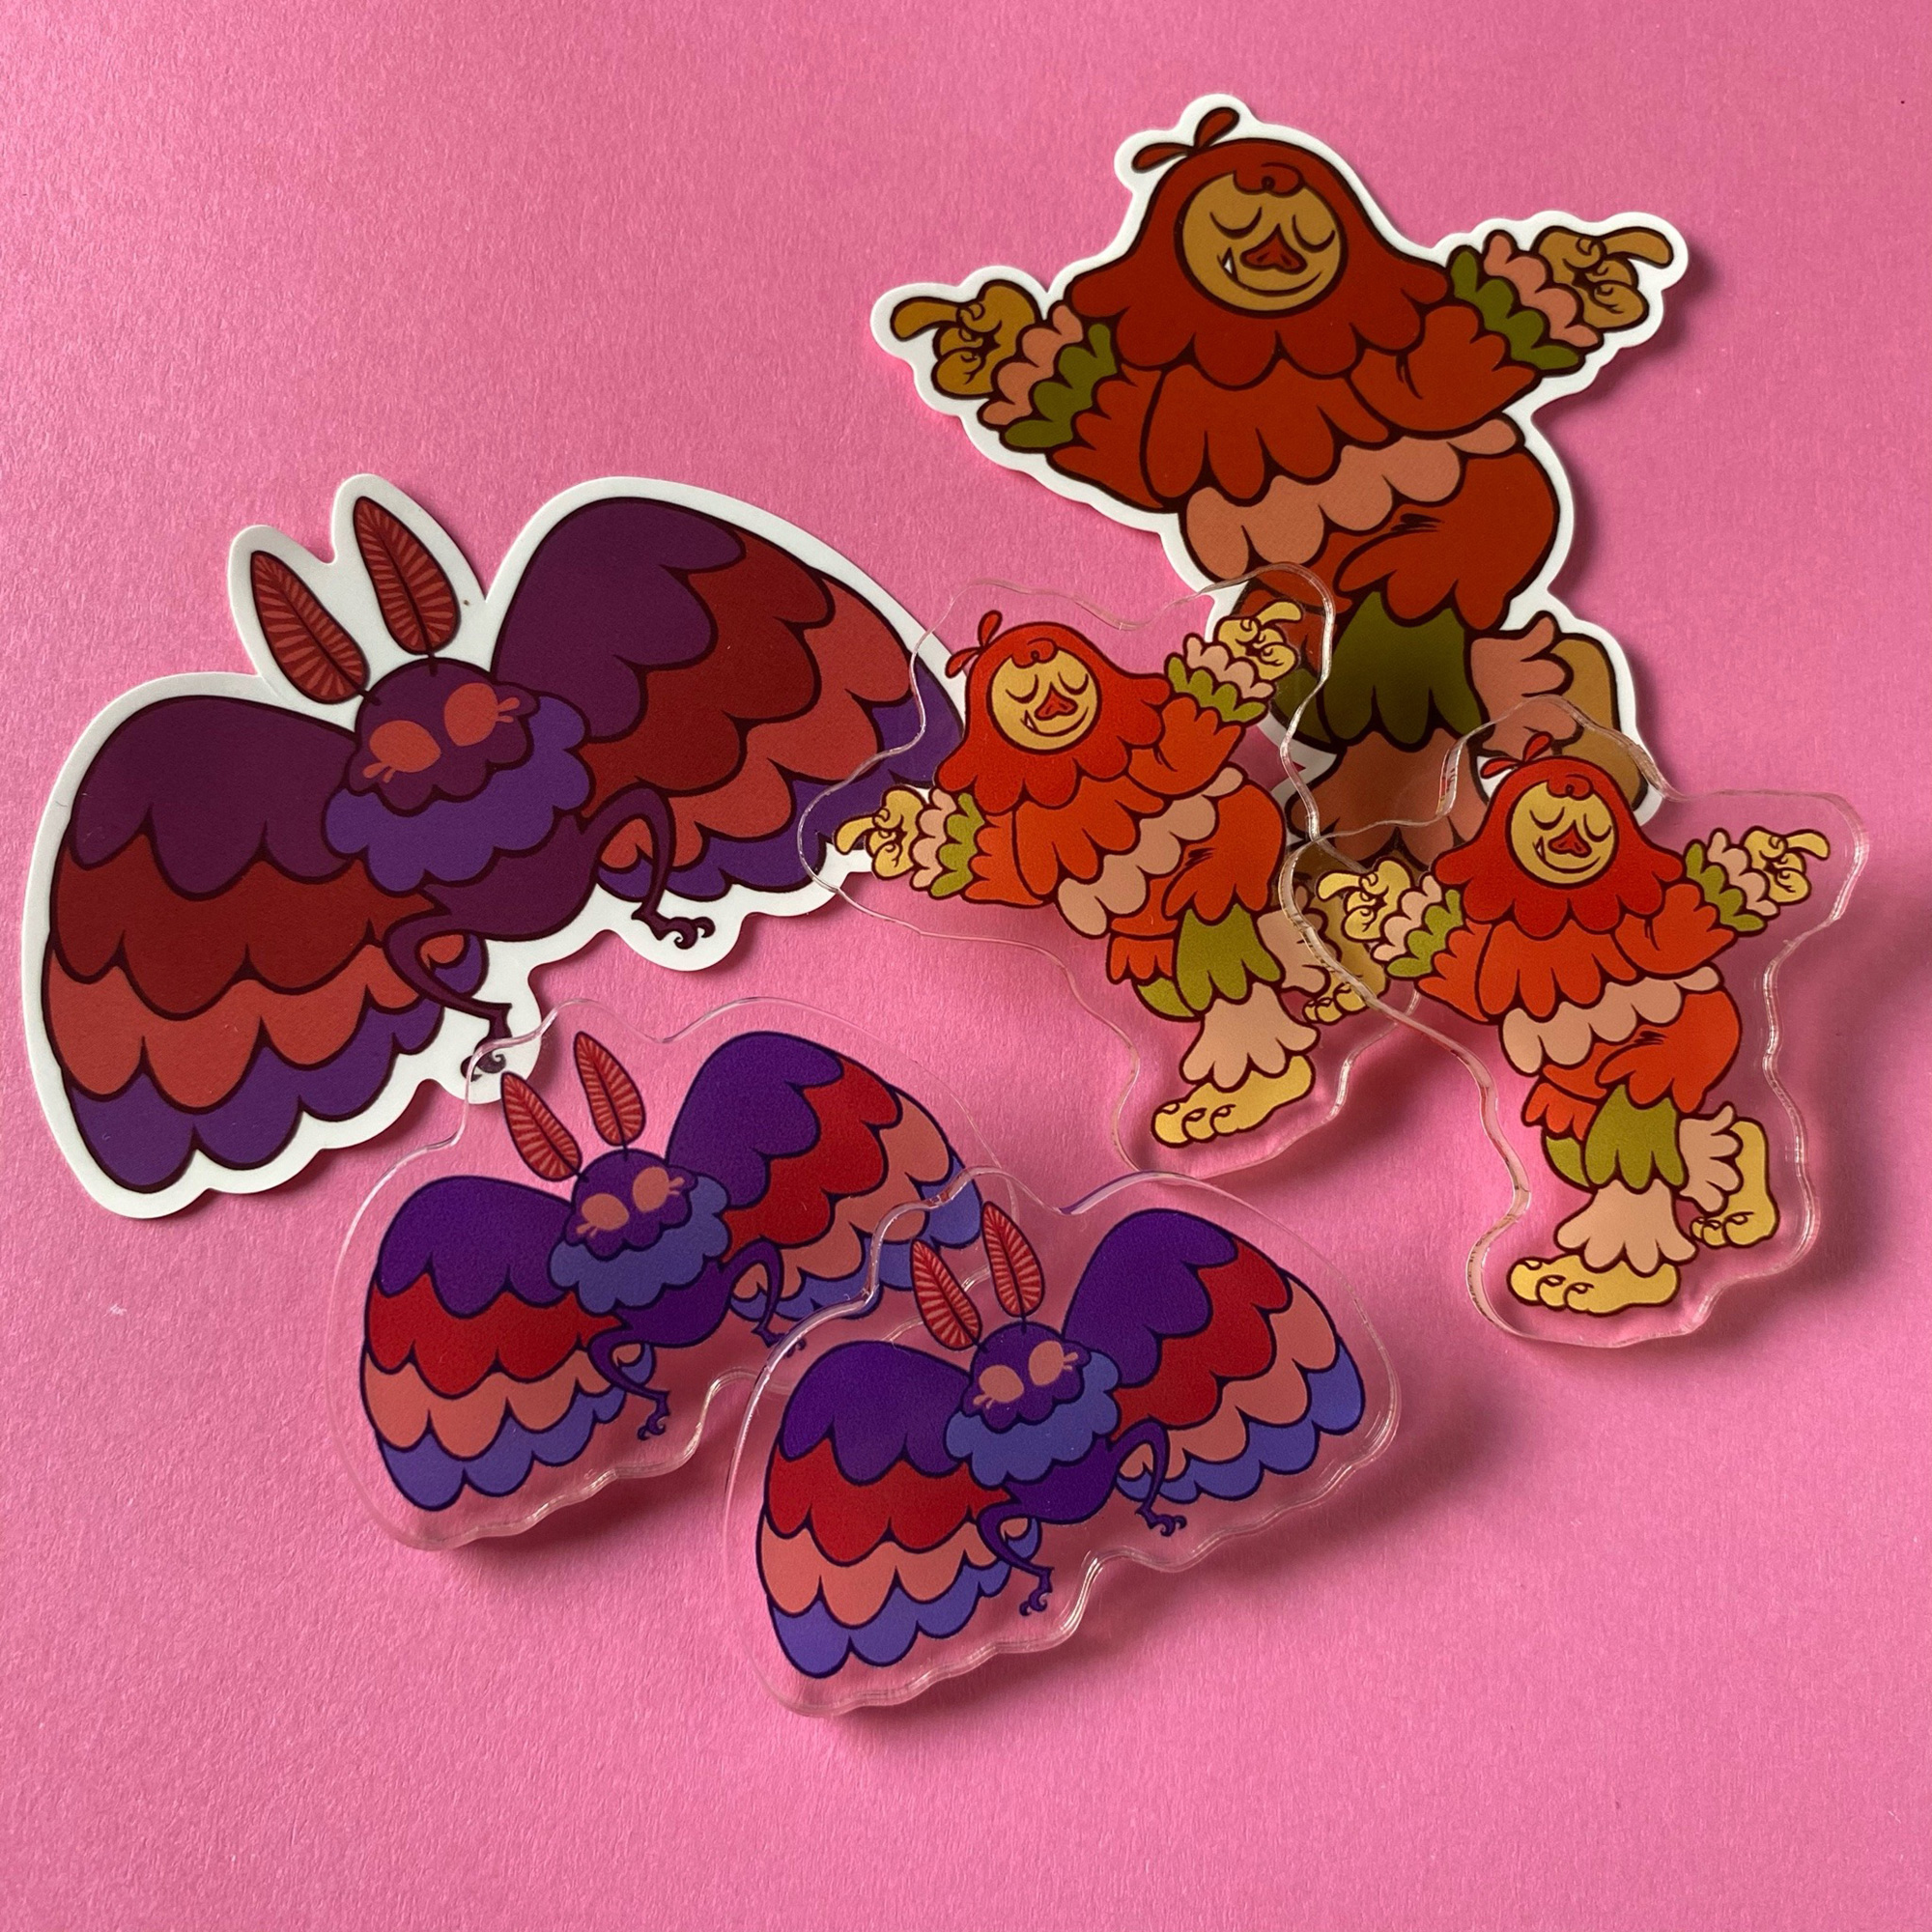 Mock ups of stickers and pins